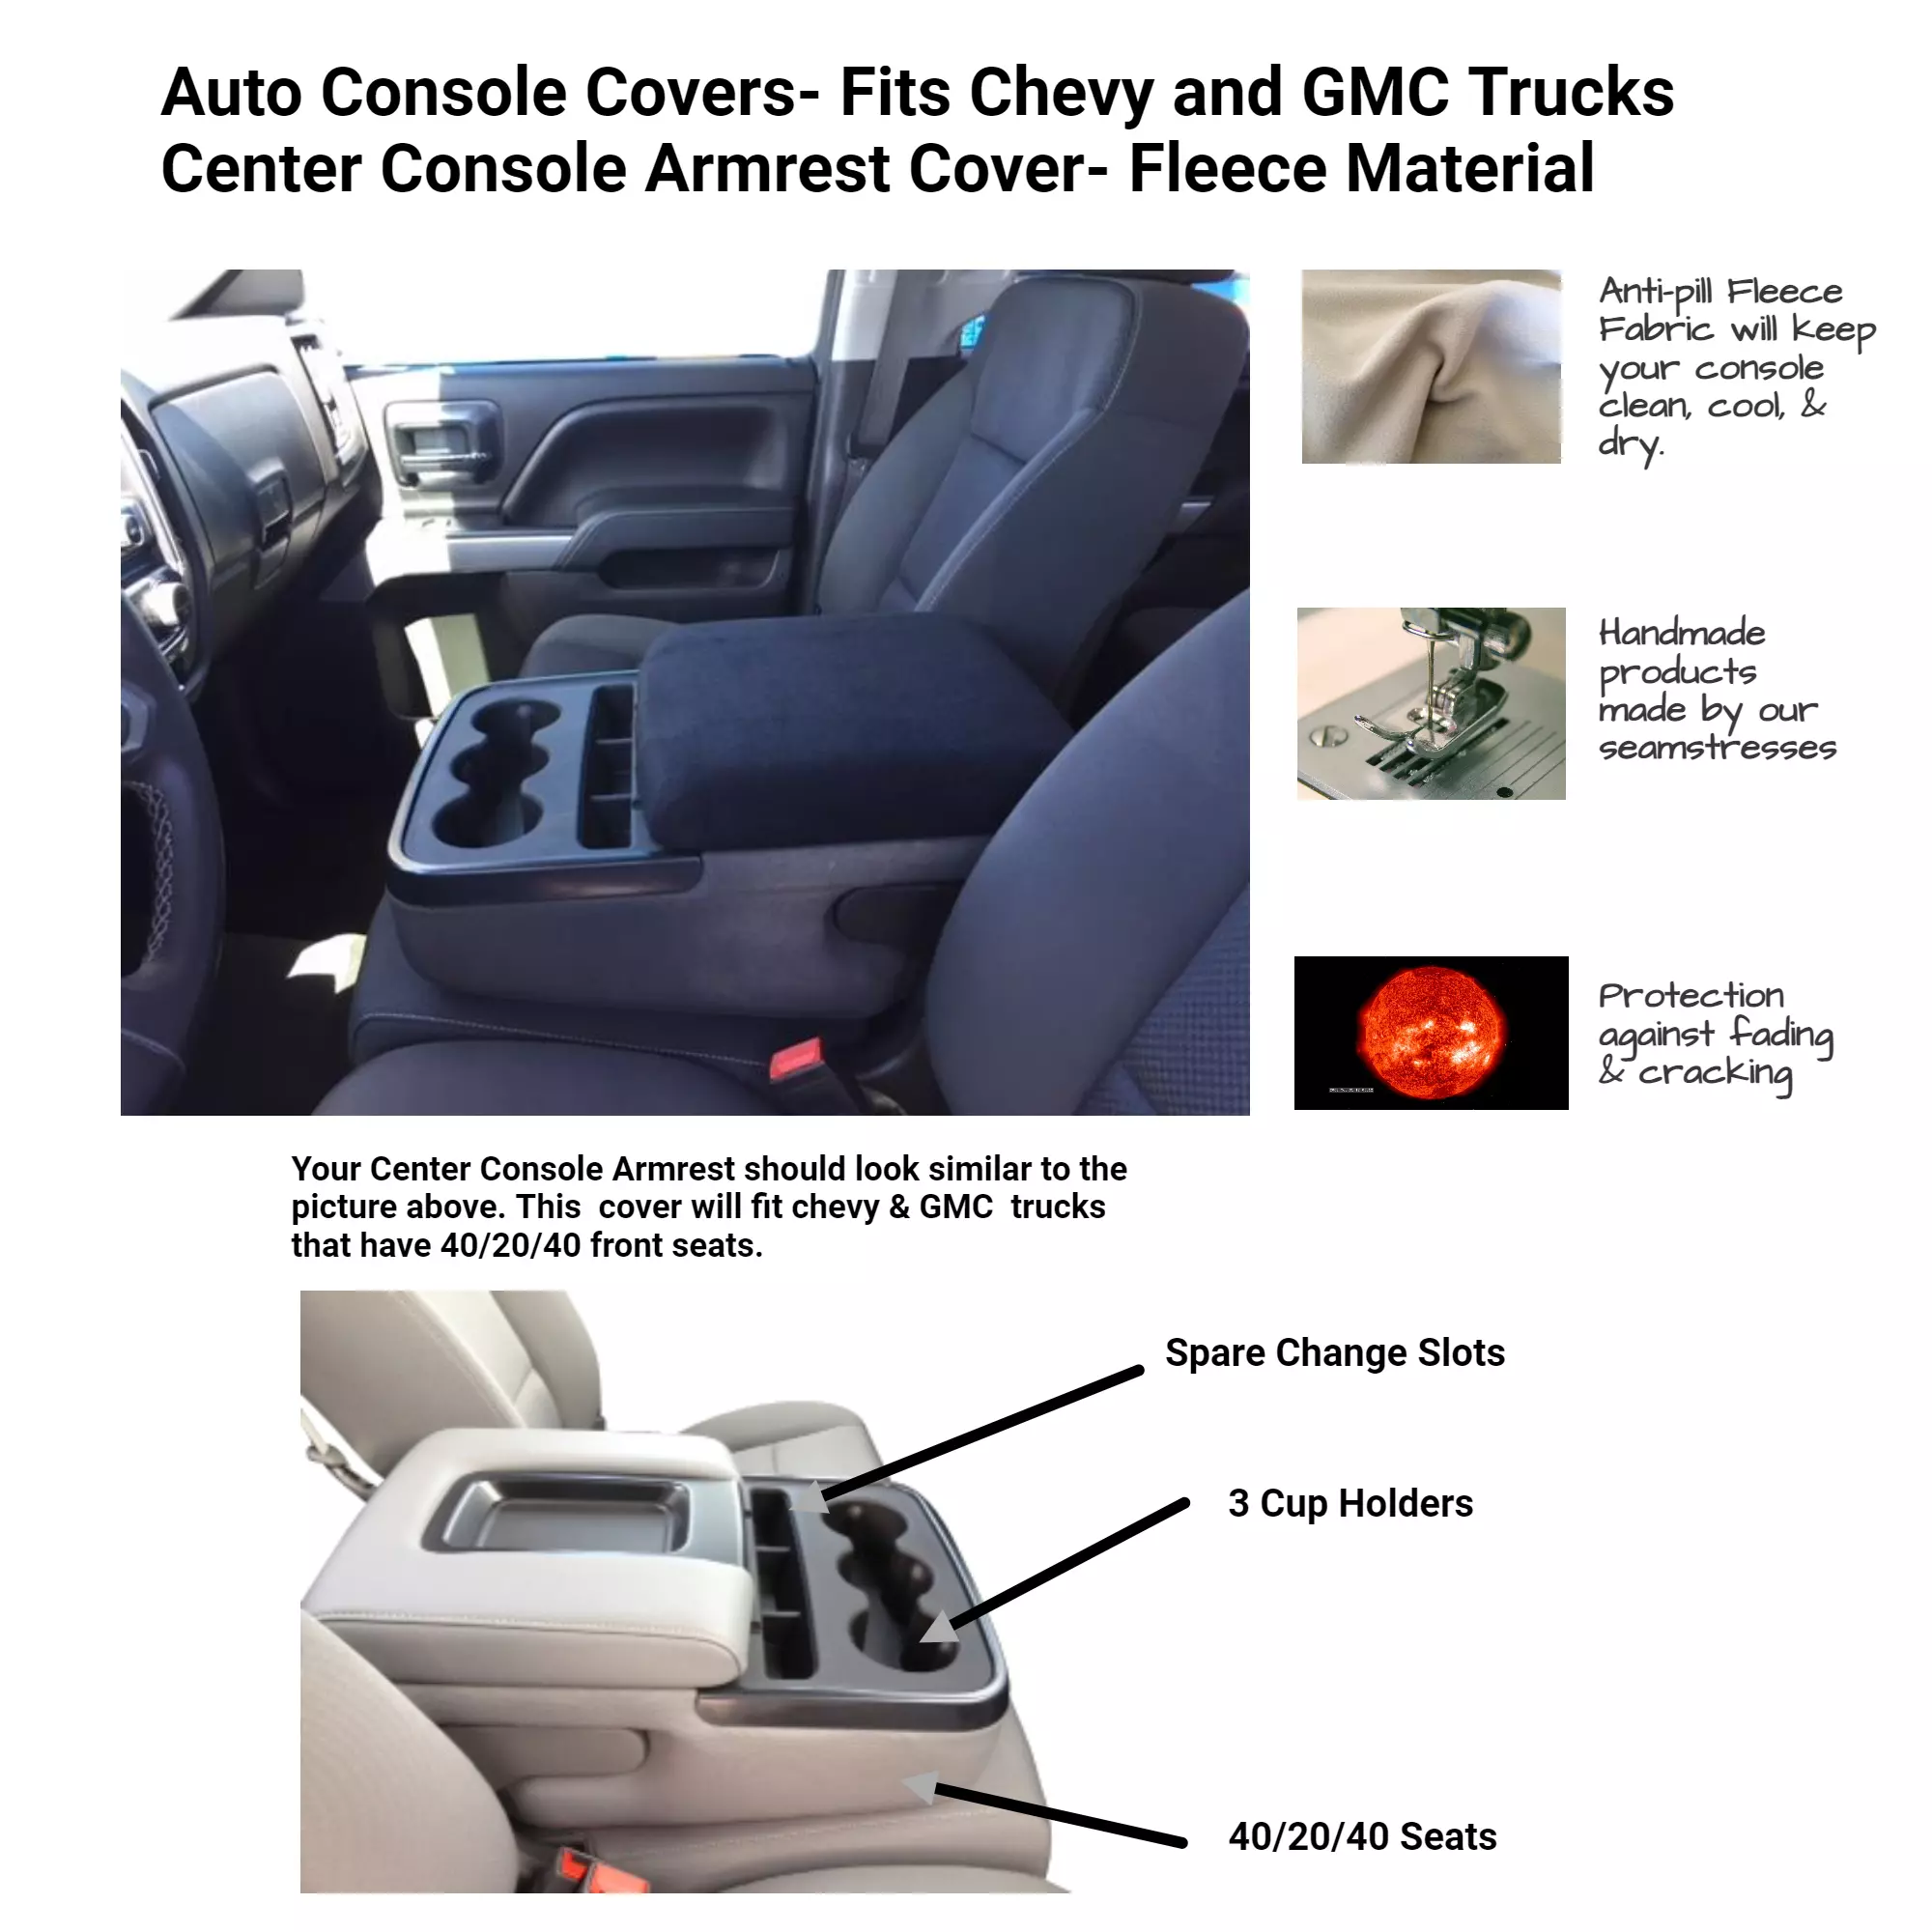 Buy Center Console Armrest Cover Fits the Chevy Silverado 3500HD 2014-2019-All Models & Trims with 40/20/40 front seats -Fleece Material​ 